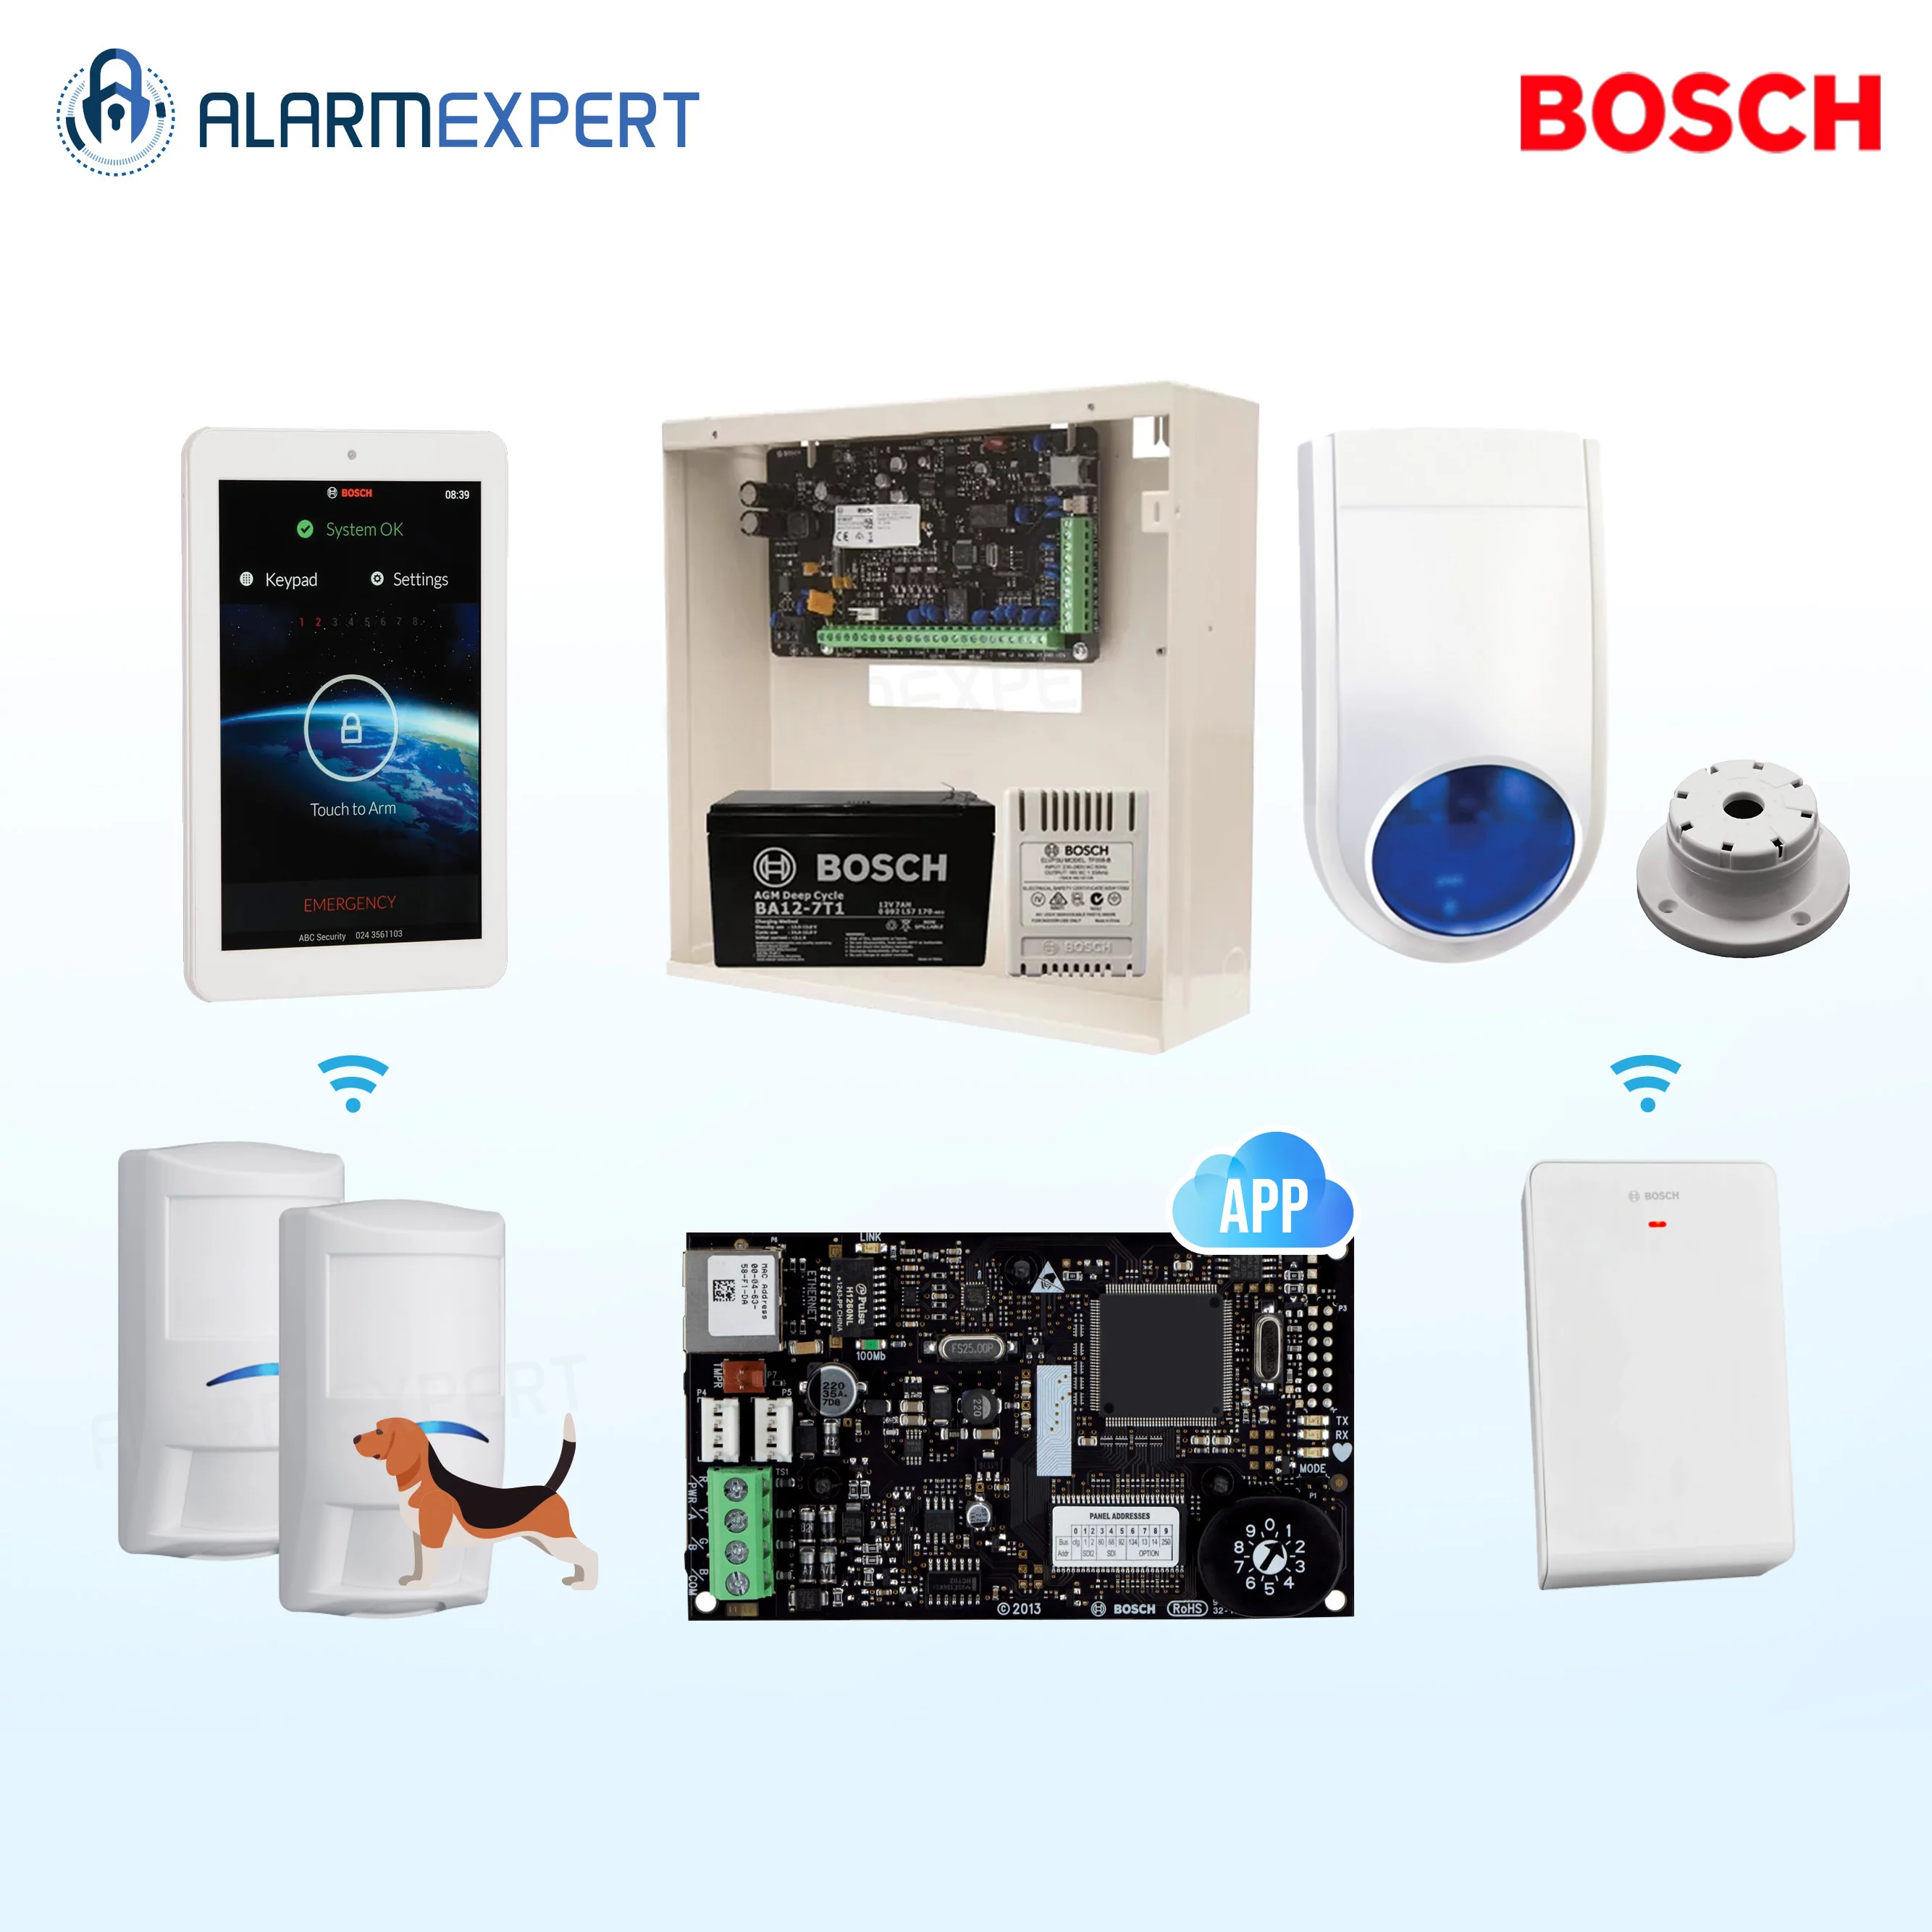 Bosch Solution 3000 IP + 2 Wireless Tri-Techs (Pet Proof) + 7" Touch screen Keypad + Receiver